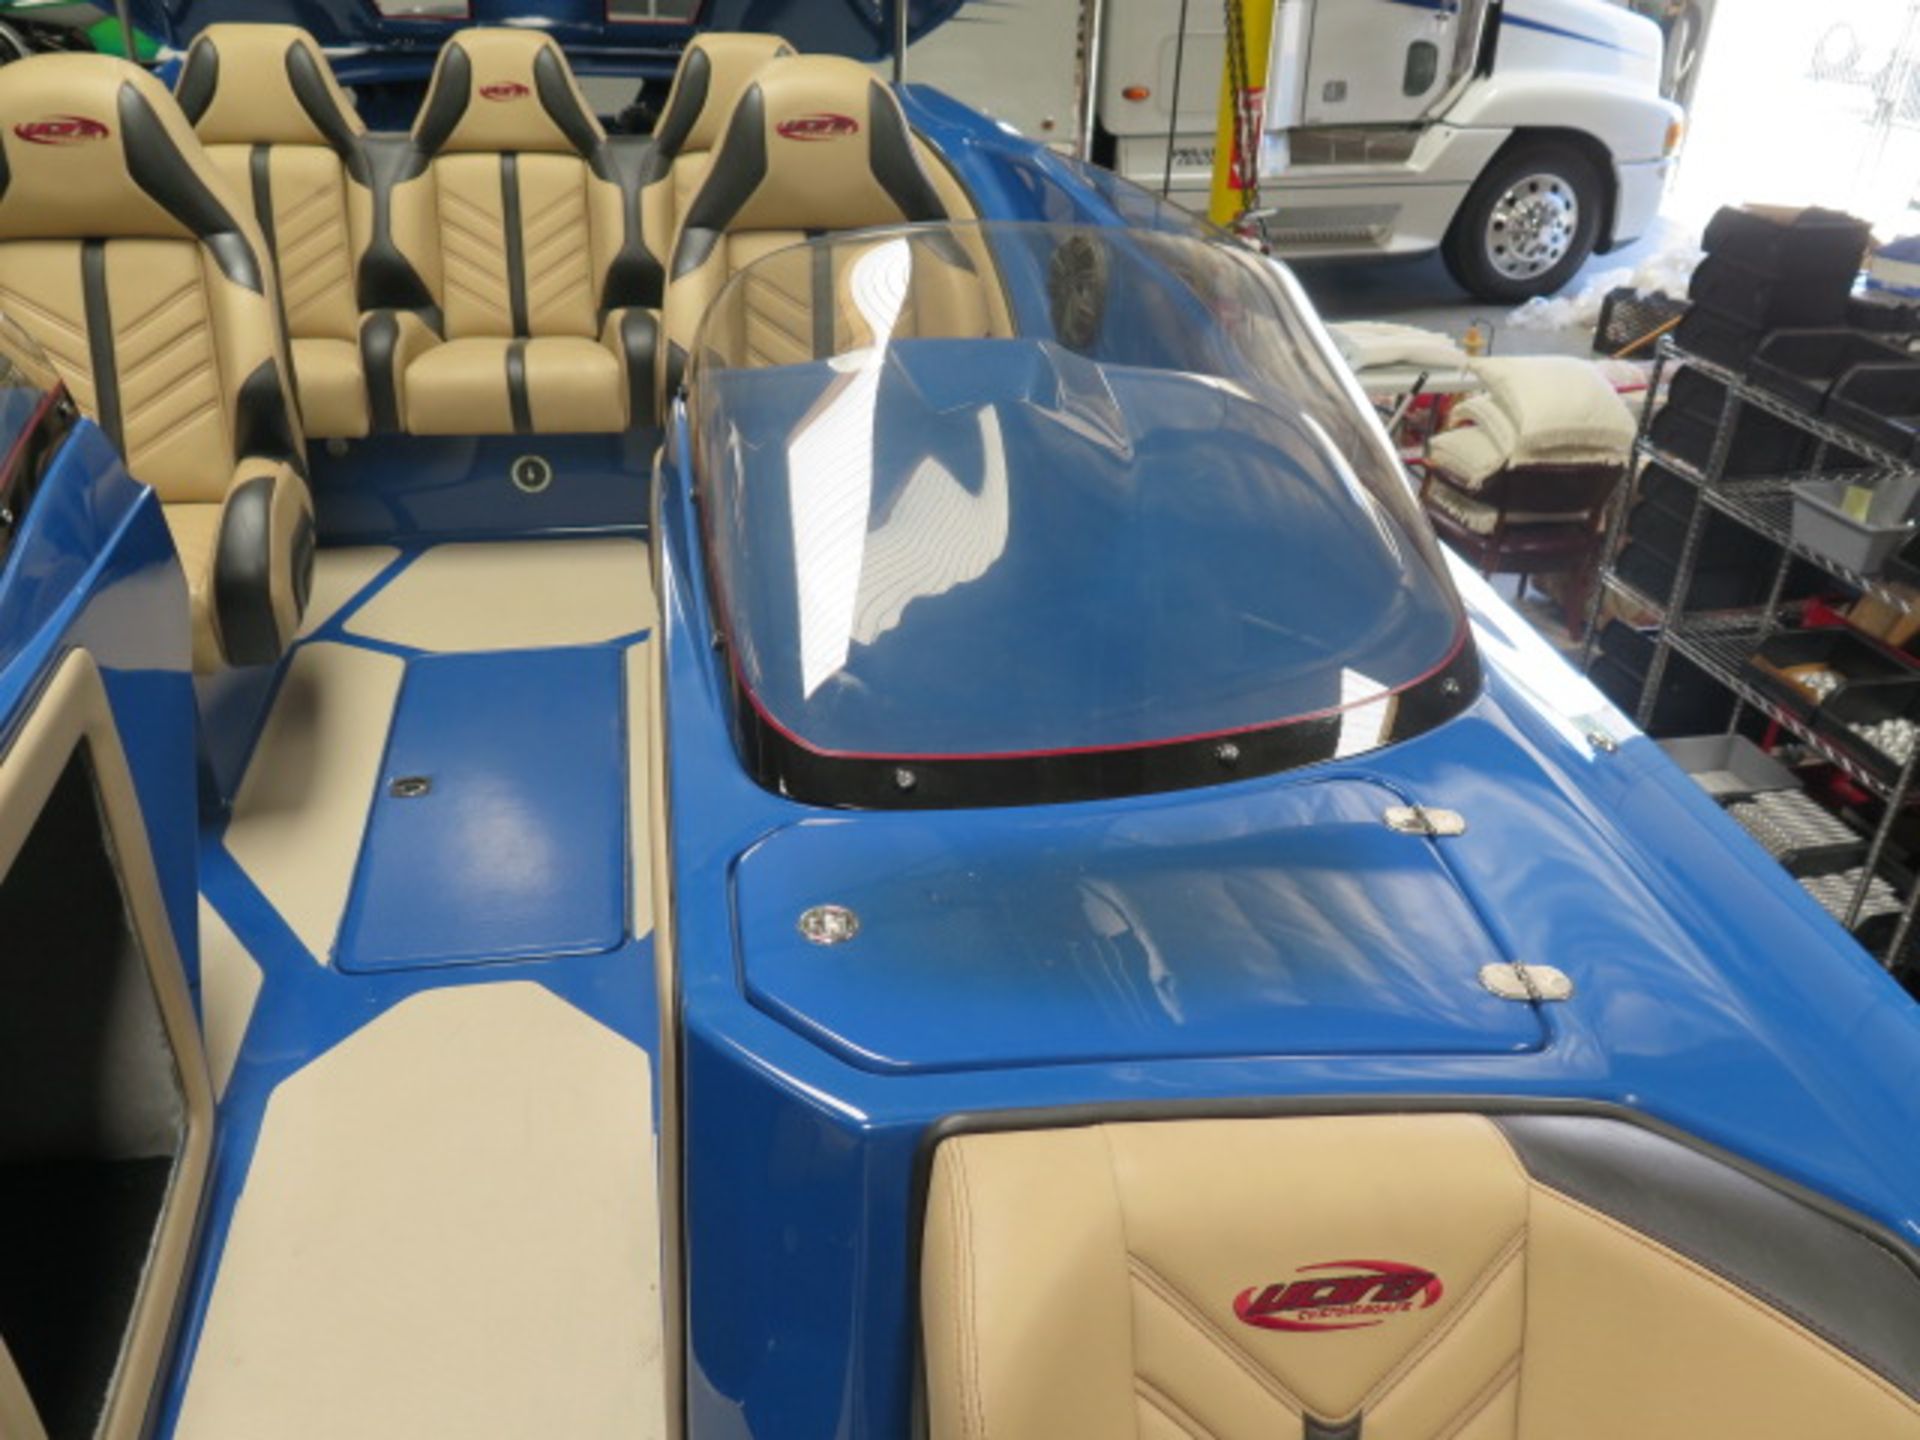 2020 28 Ultra Deck Boat w/ Boostpower 550 EFI (23 Hrs), Inco SCX Drive, Deluxe Options, SOLD AS IS - Image 21 of 58